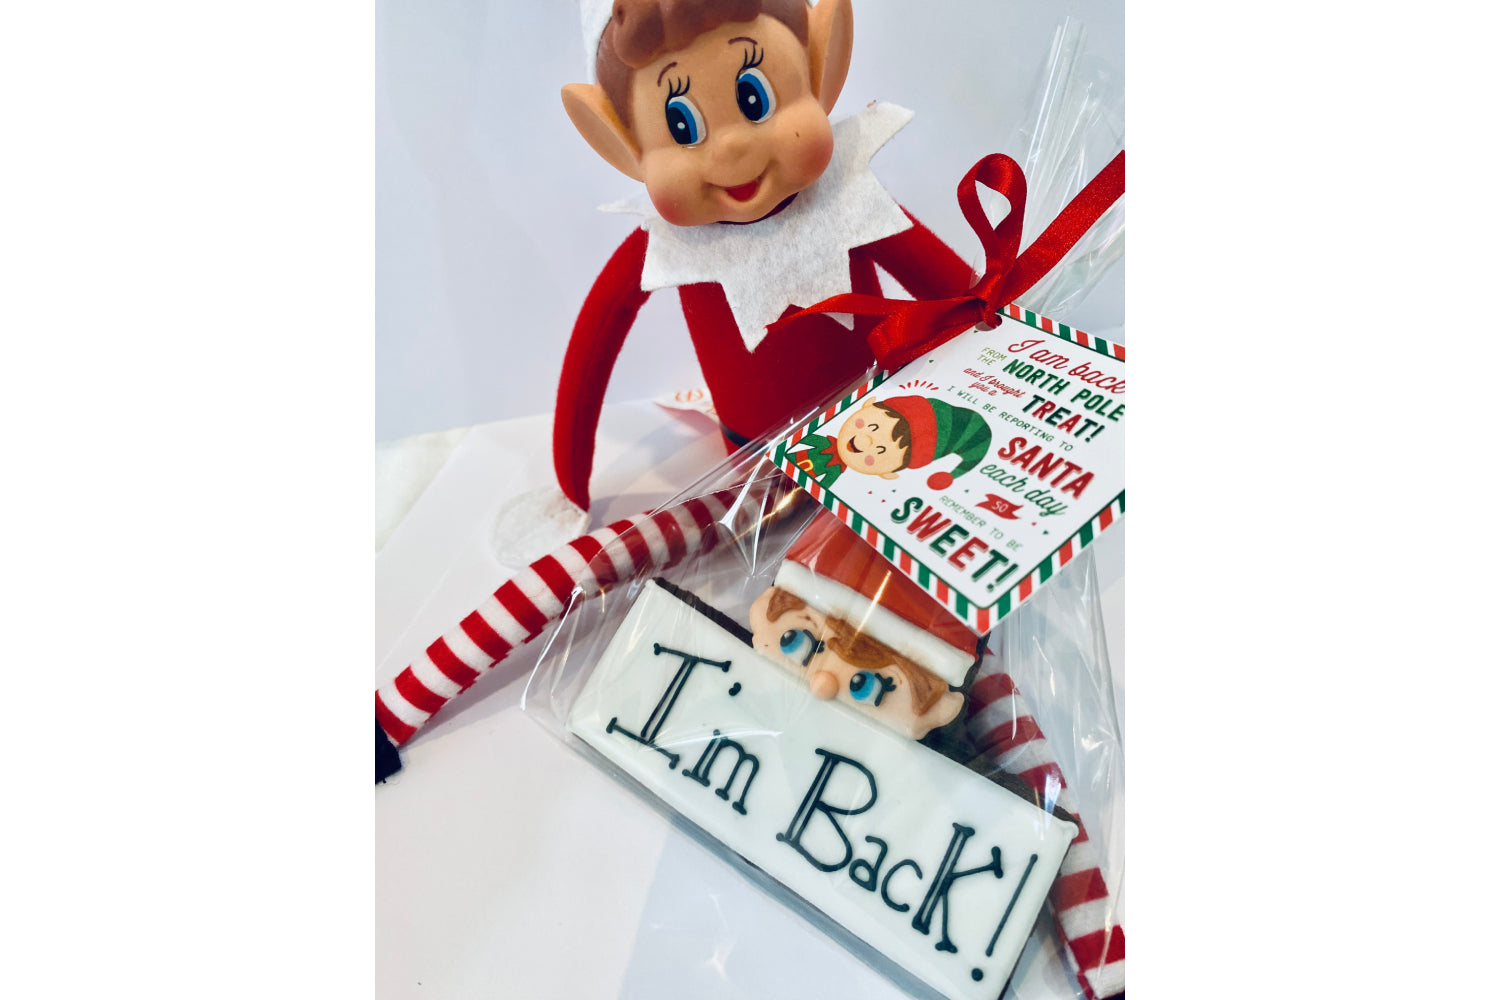 elf on the shelf biscuits to announce the elf is back. Iced biscuit that says I'm back in black icing with elf face either side.